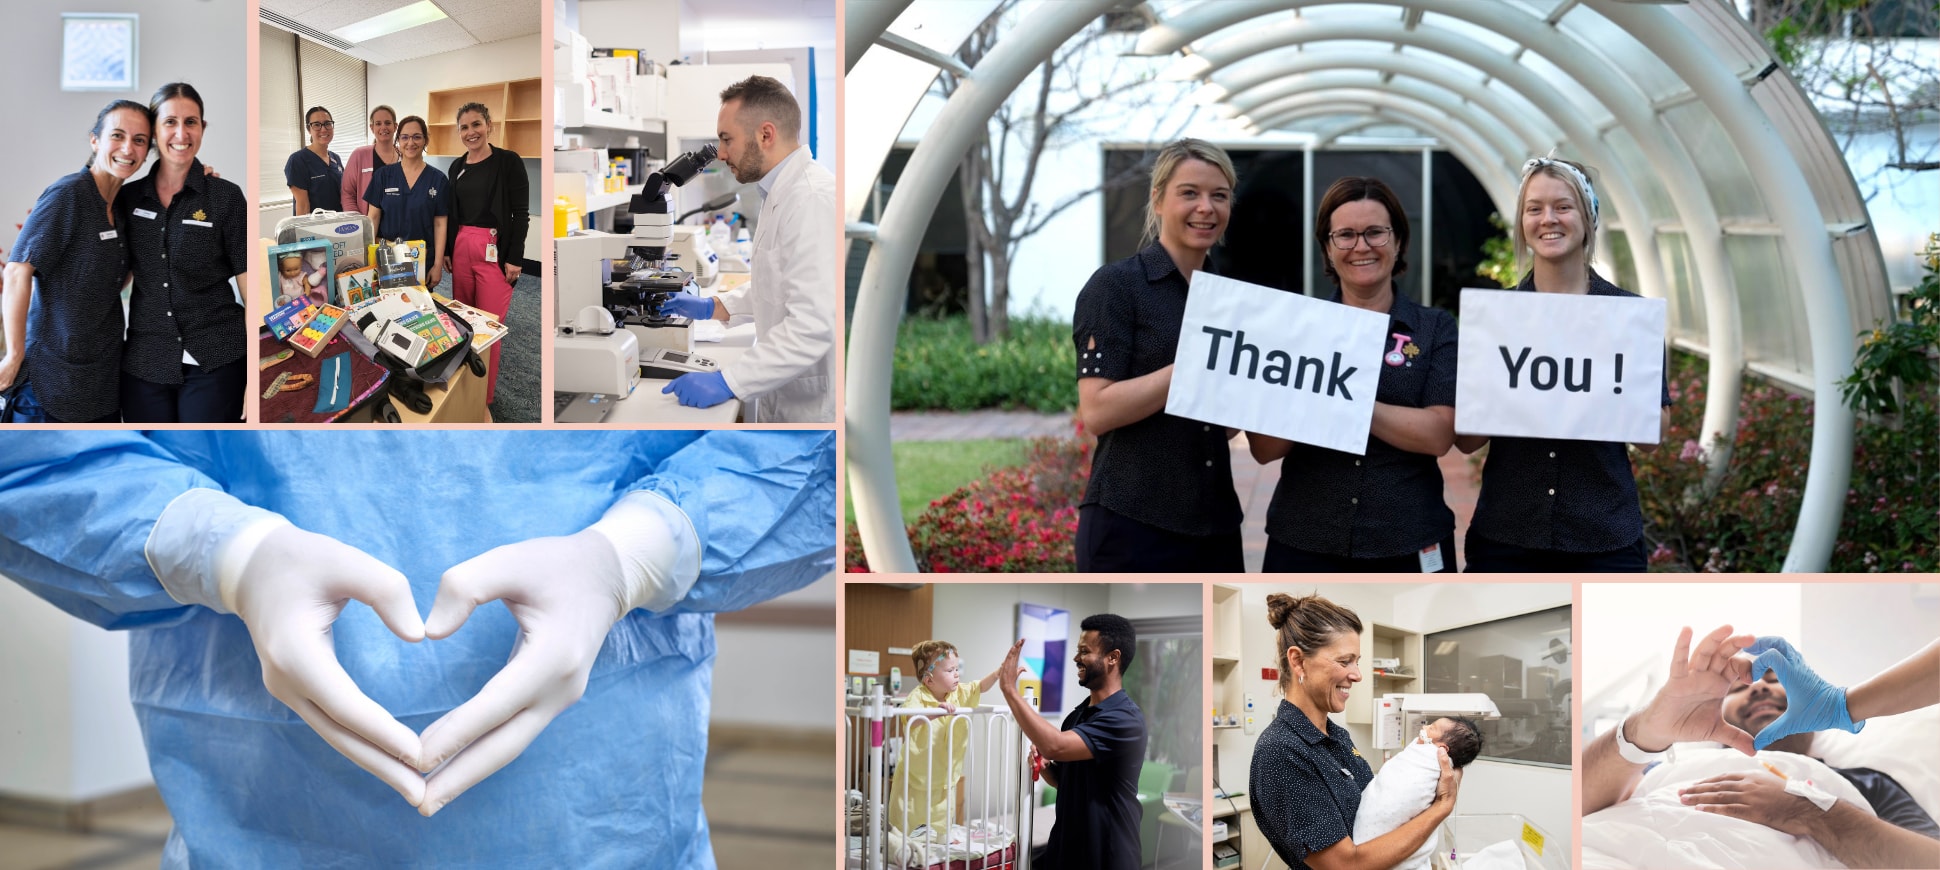 A collage of photos featuring caregivers smiling with donations, interacting with patients and holding up a thank you sign.